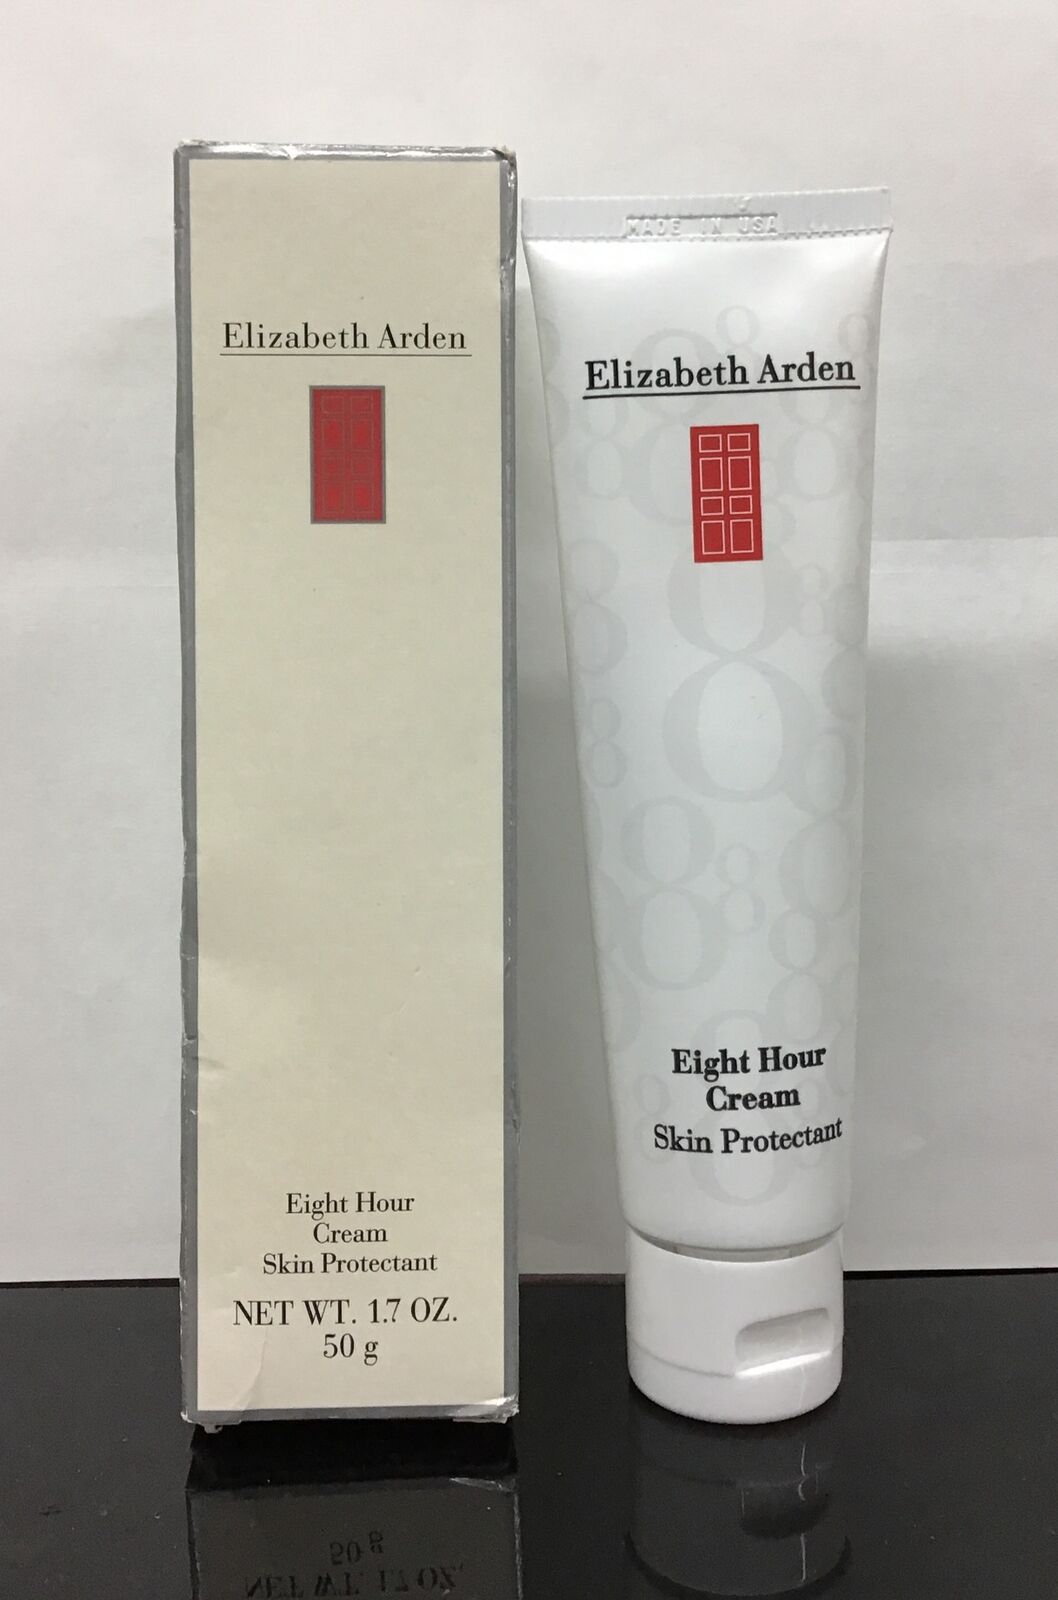 Elizabeth Arden Eight Hour Cream Skin Protectant 1.7 OZ, As Pictured.